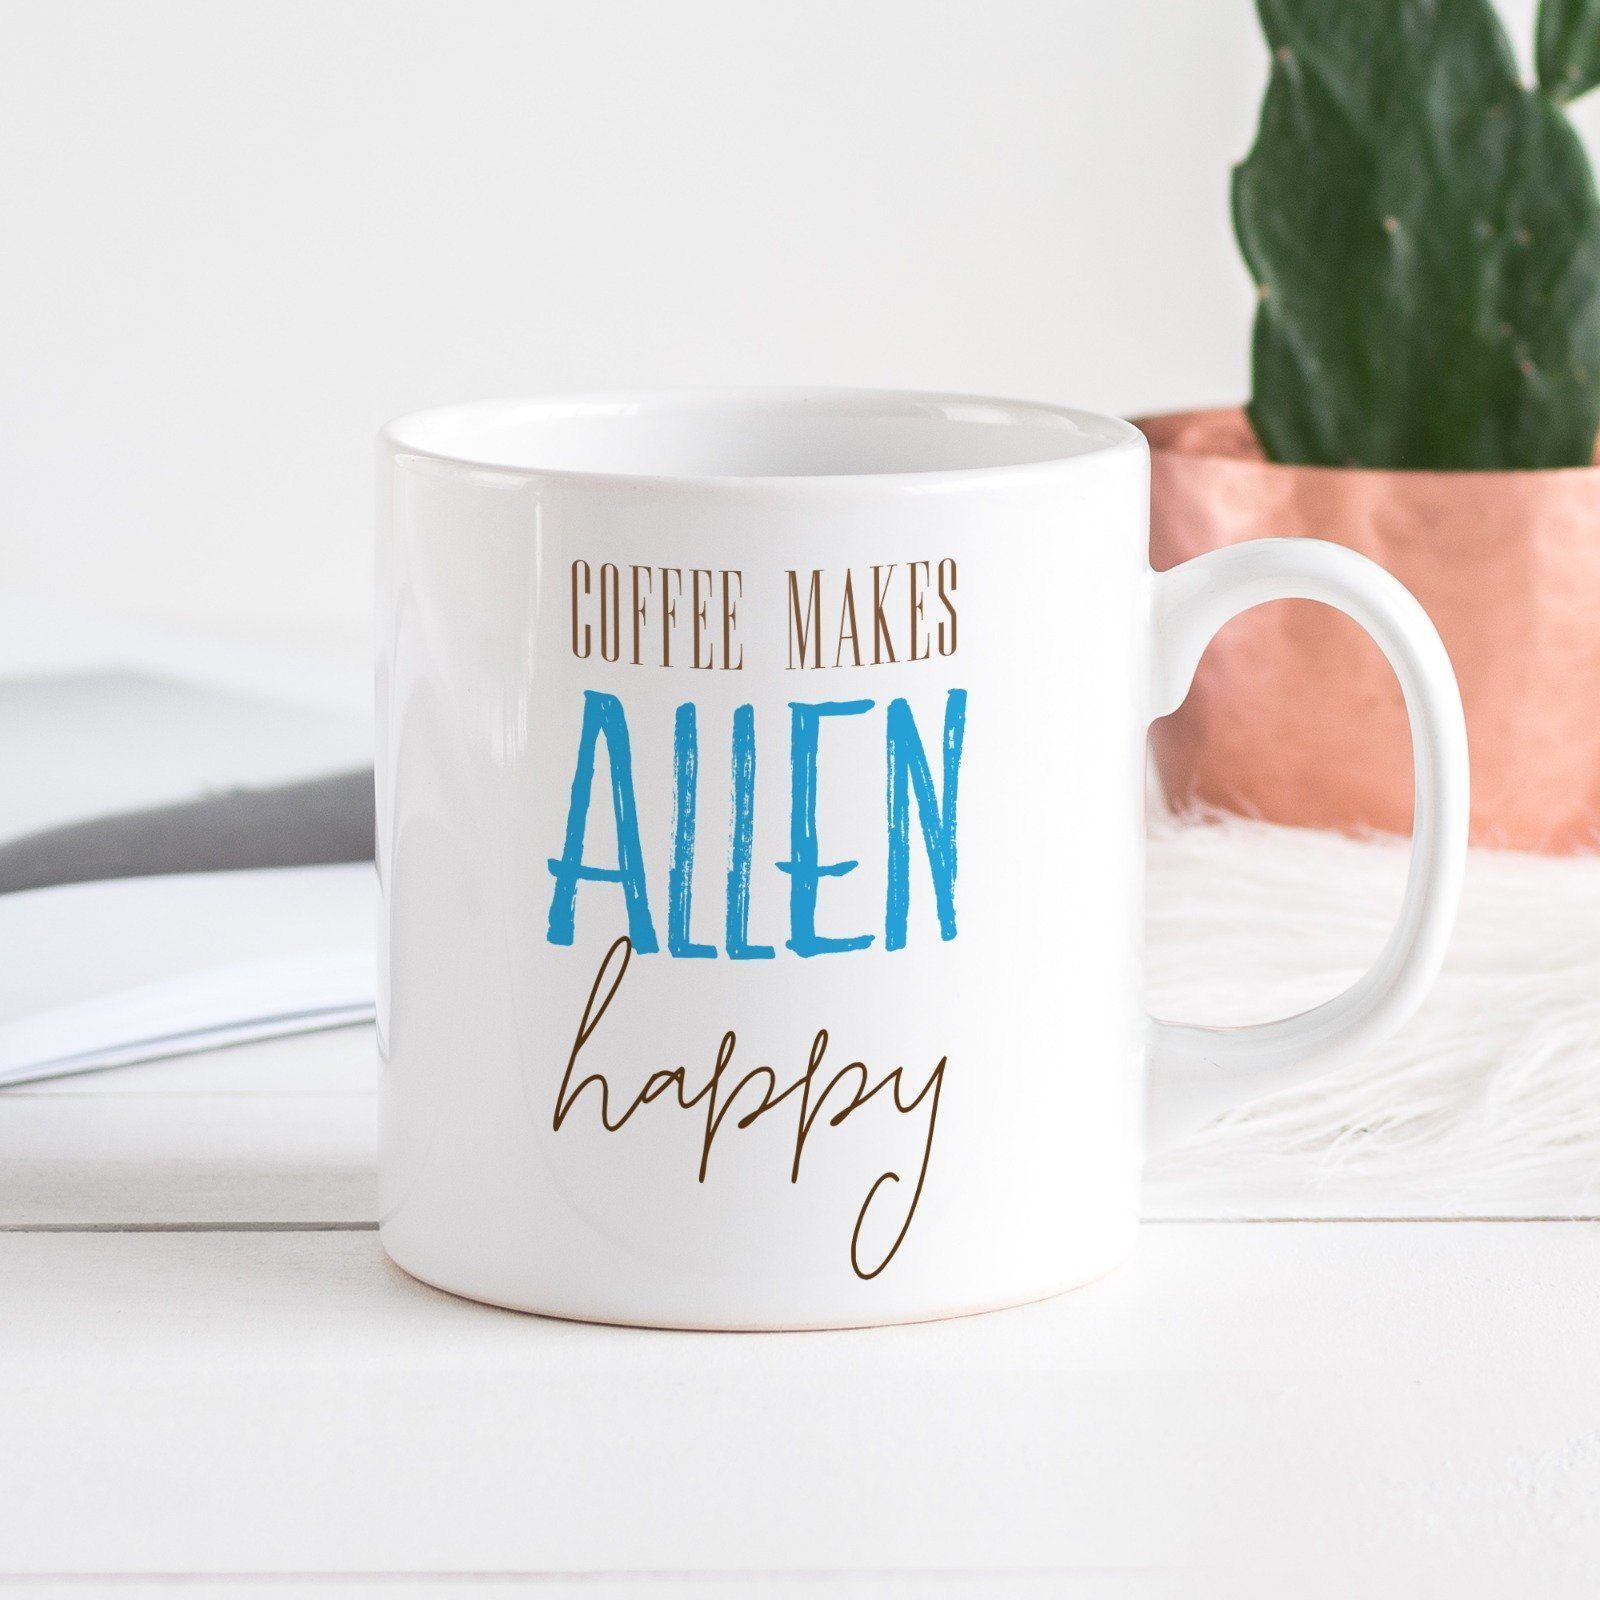 Coffee makes happy mug, Personalised mug with name , Gift for Coffee Lover him or her